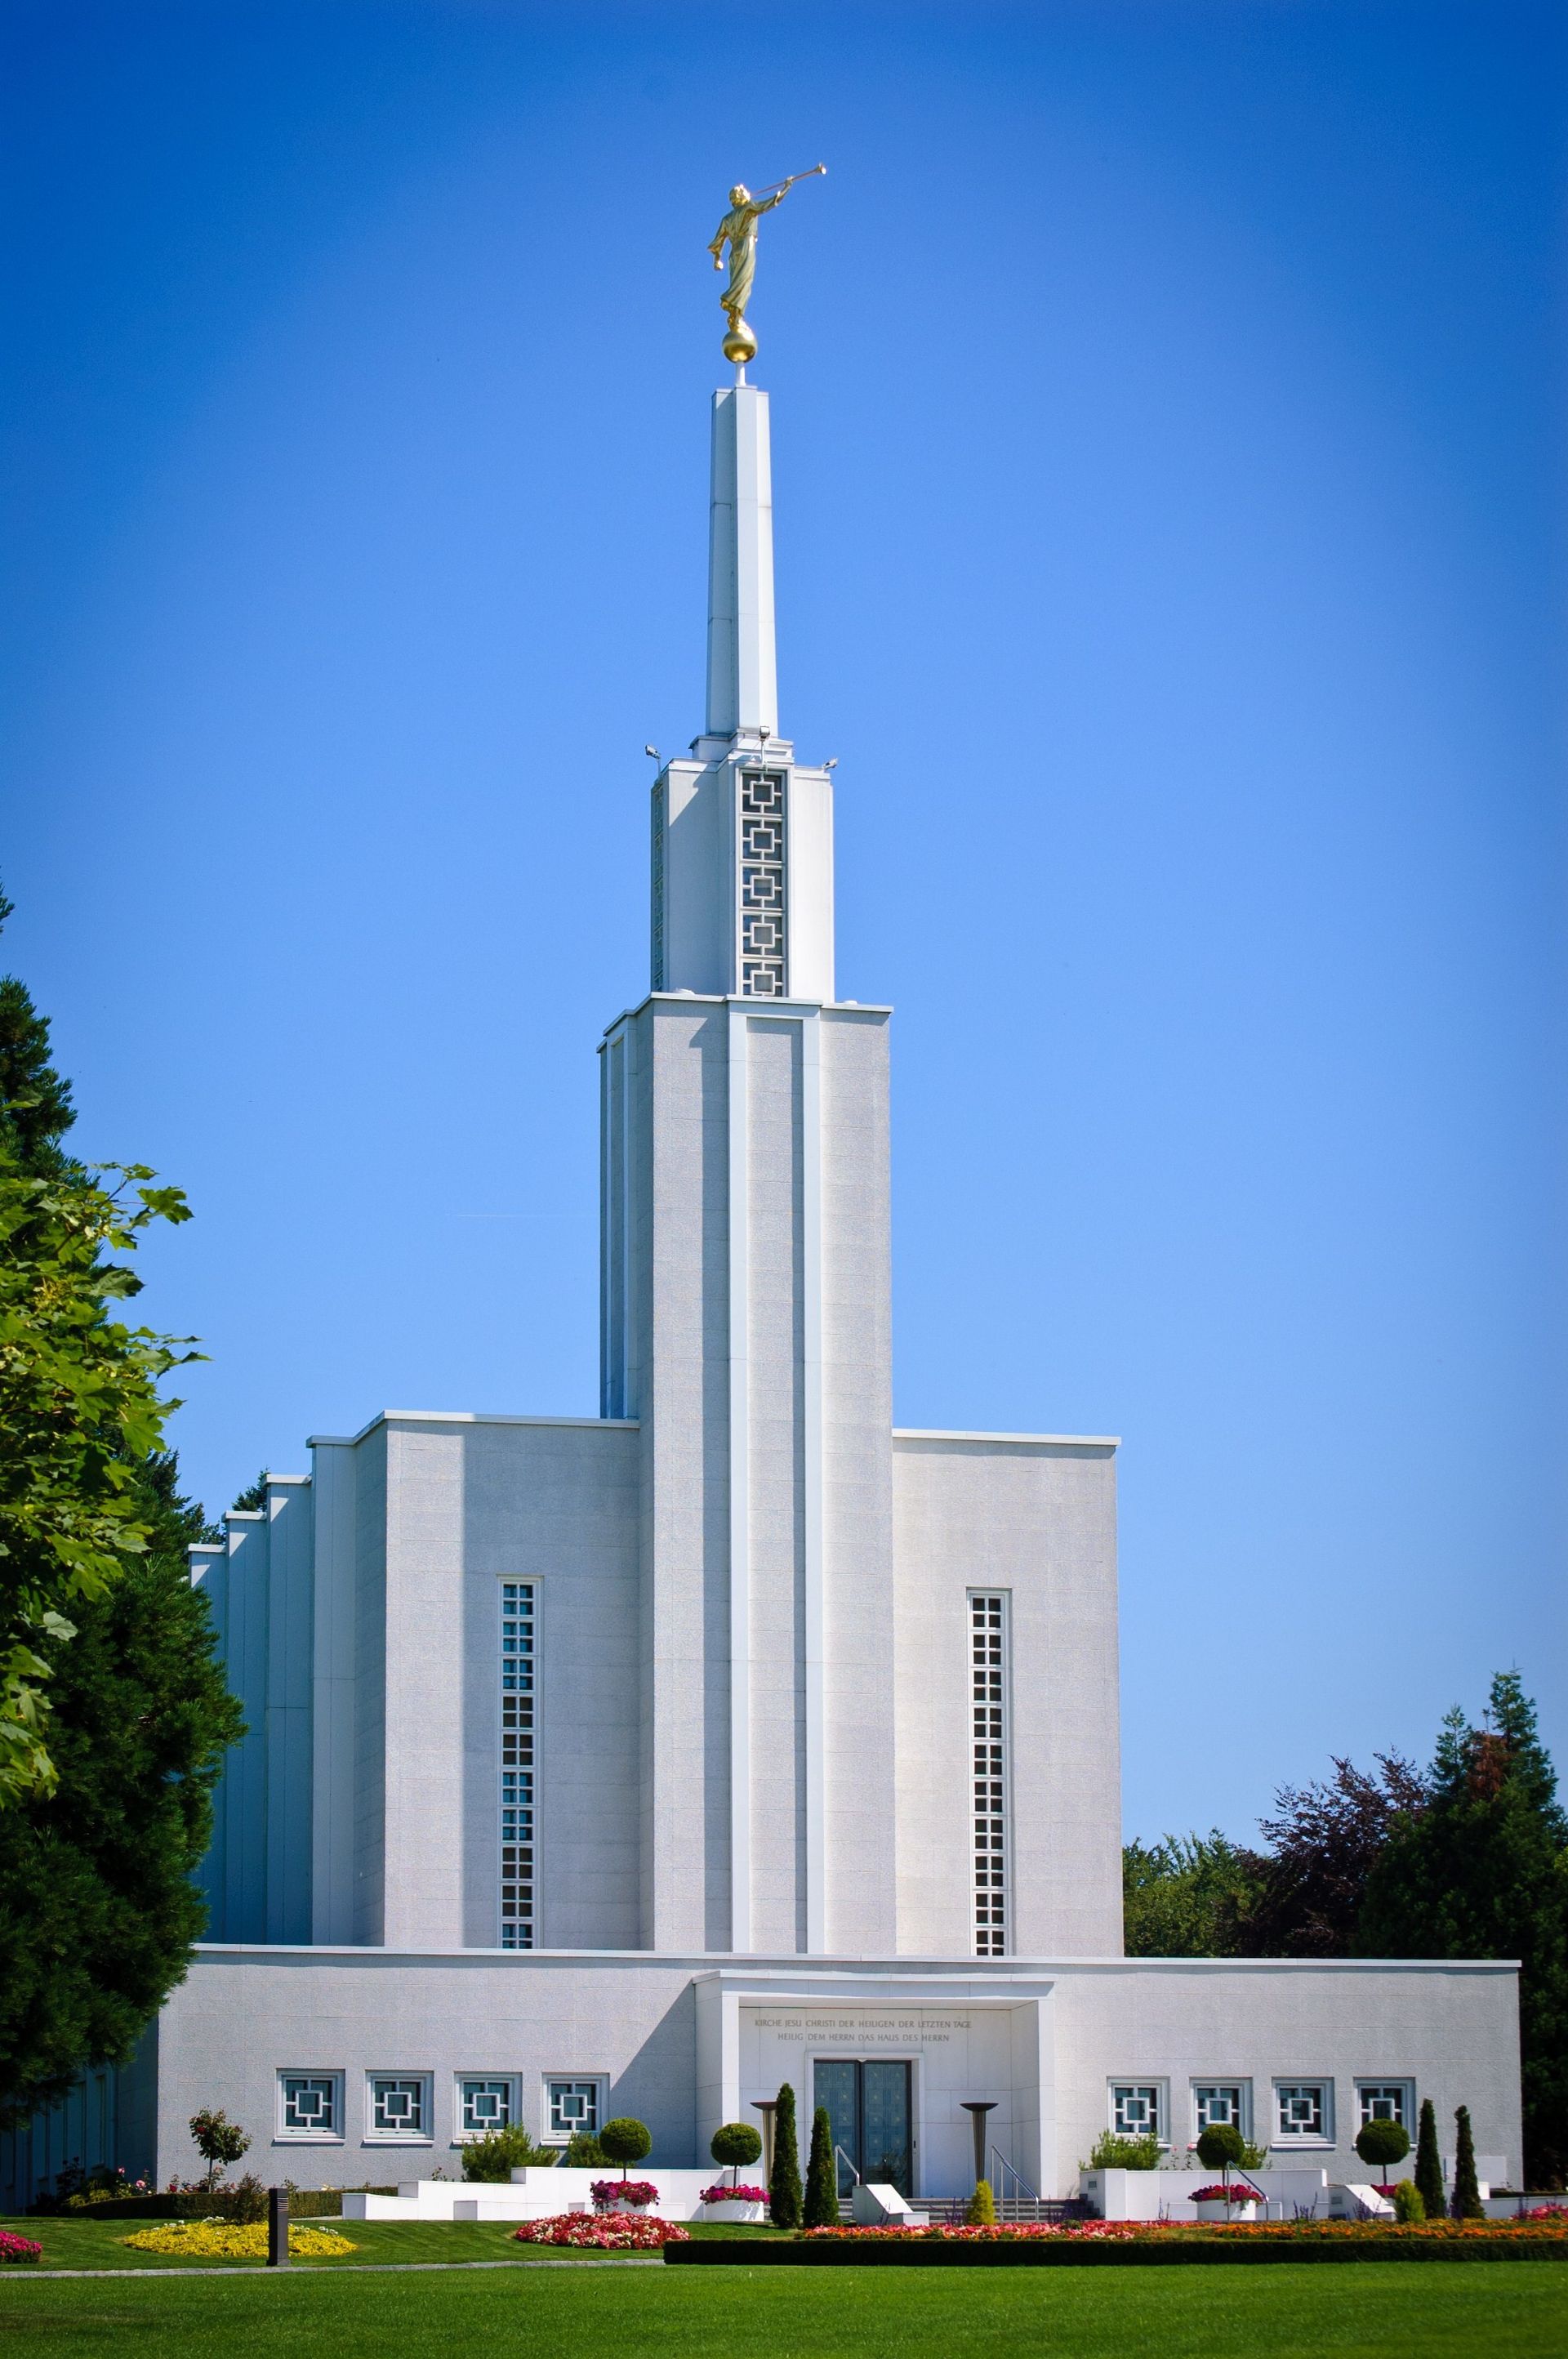 The main entrance to the Bern Switzerland Temple.